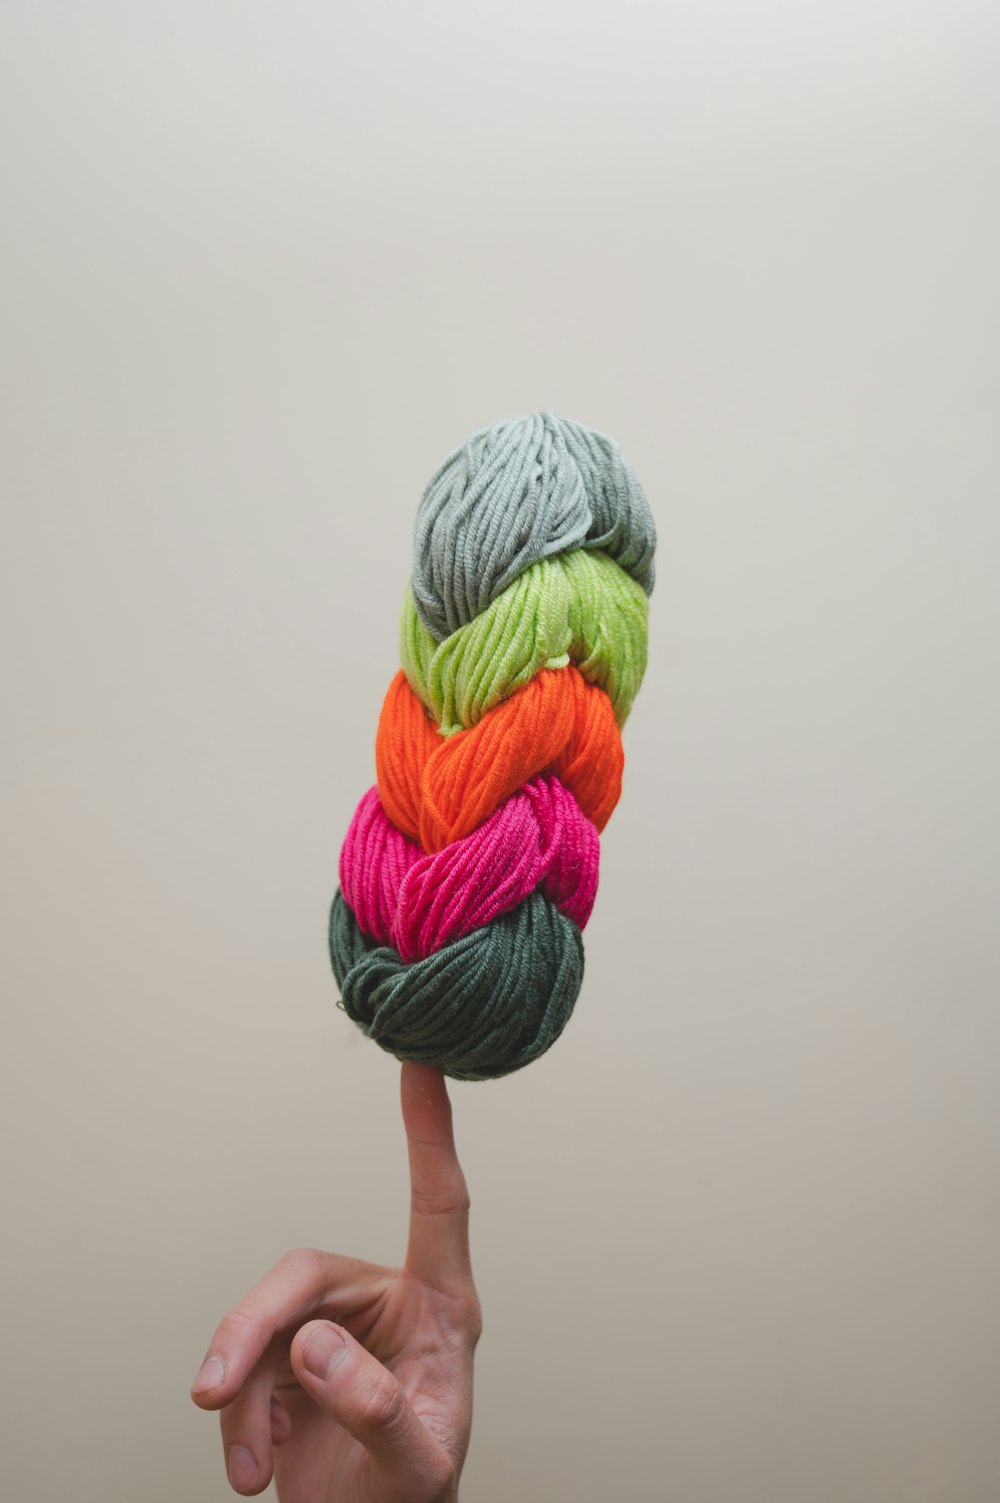 person holding green and purple yarn